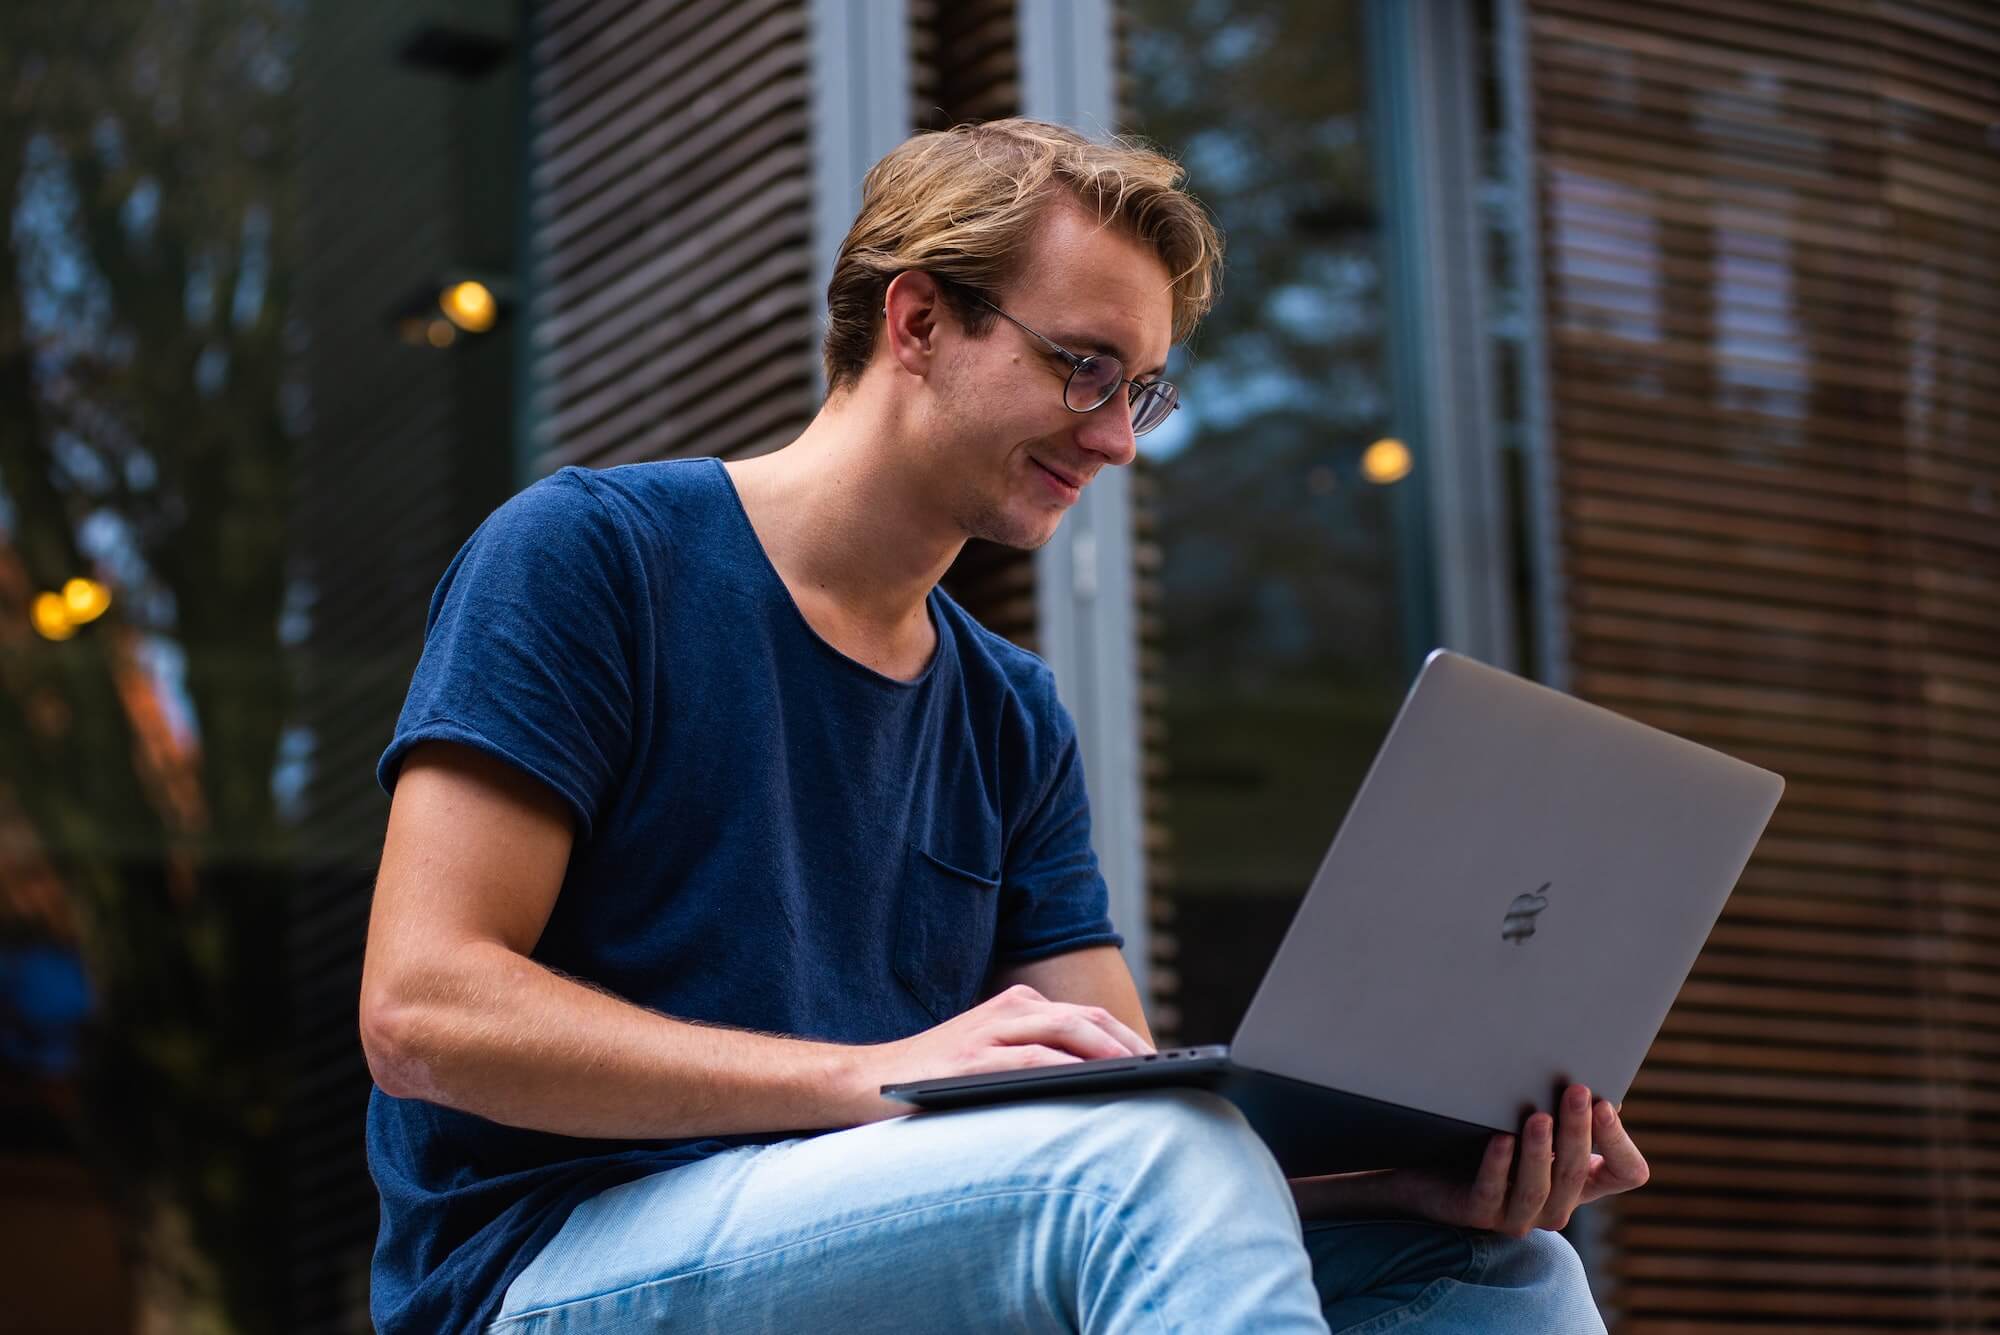 Young man smiling as he uses a laptop